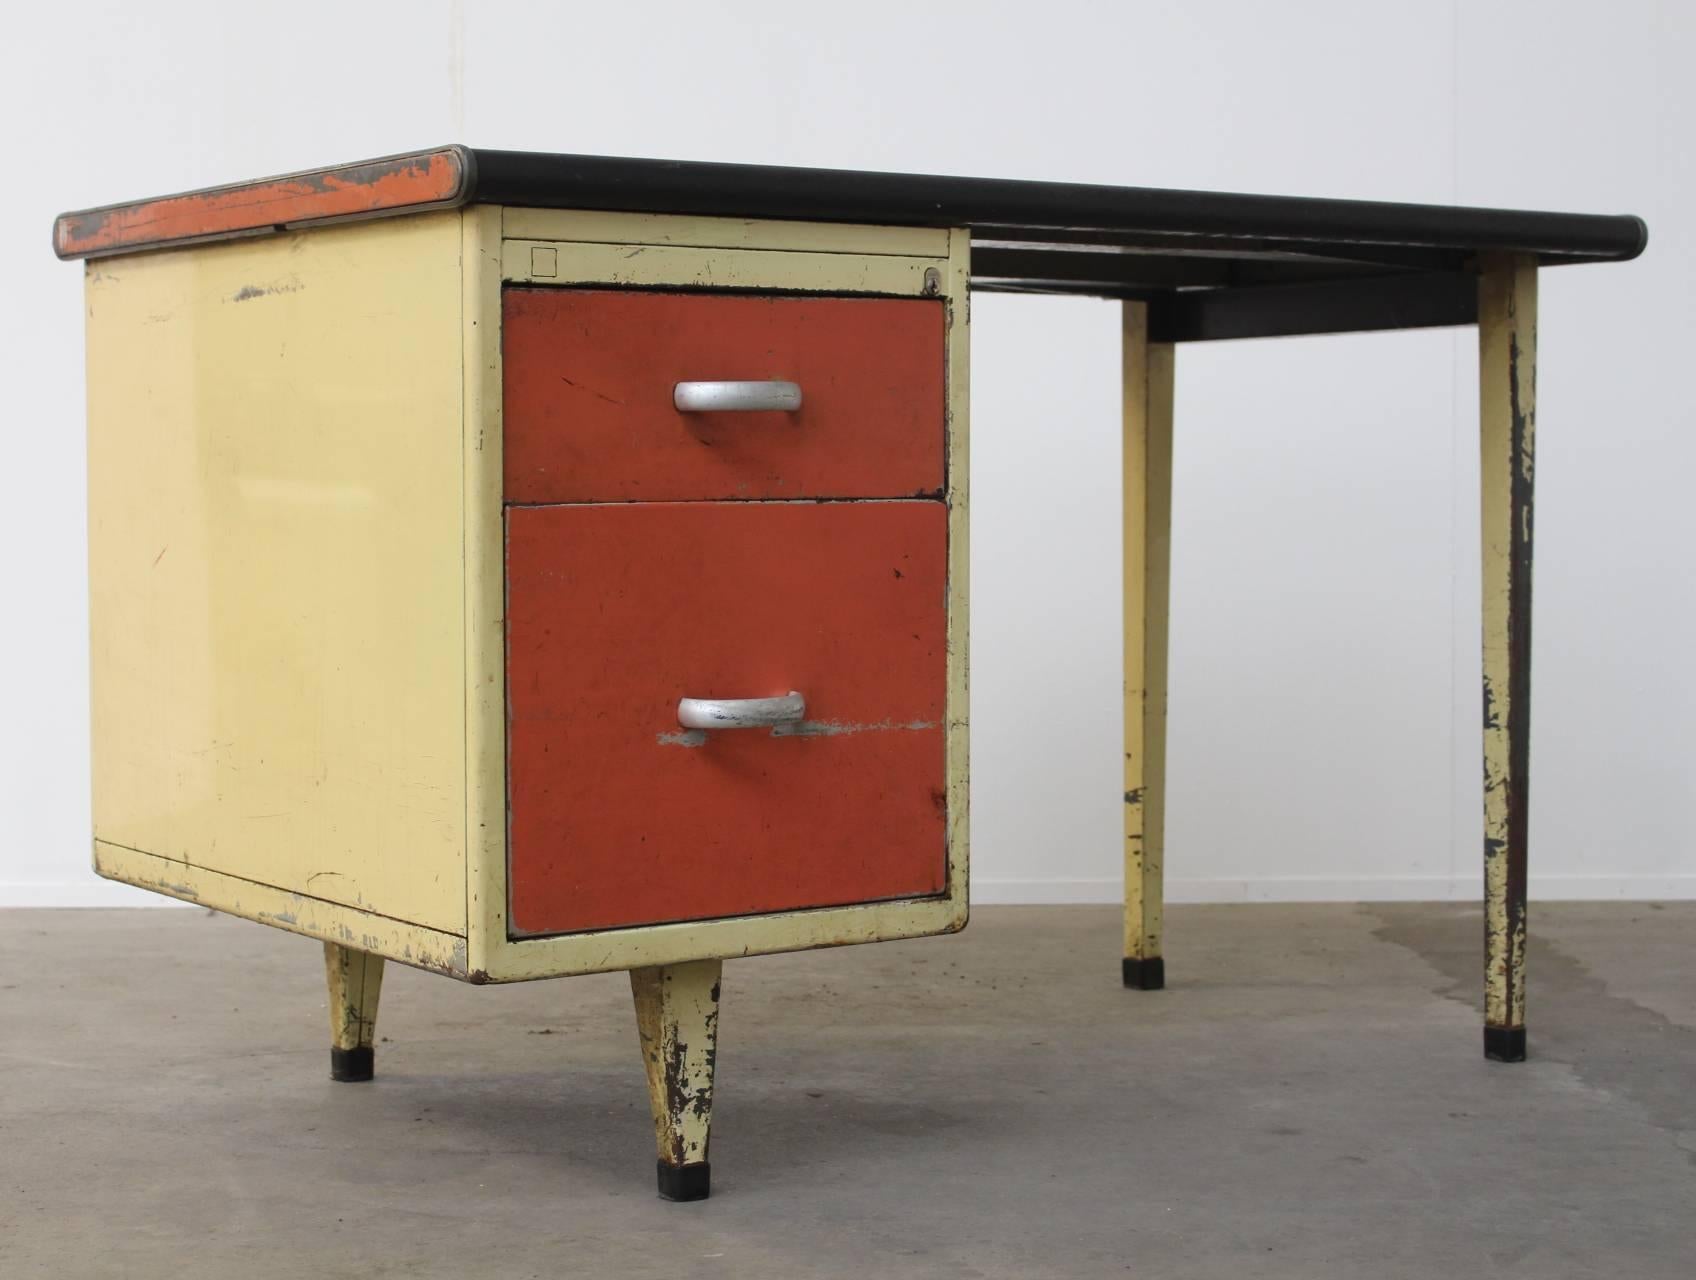 Beautifully patinated industrial desk or writing table in the style of Jean Prouvé. The colors yellow and red exactly match those of the famous President Desk by Prouvé. Beautiful eye catcher in any interior.